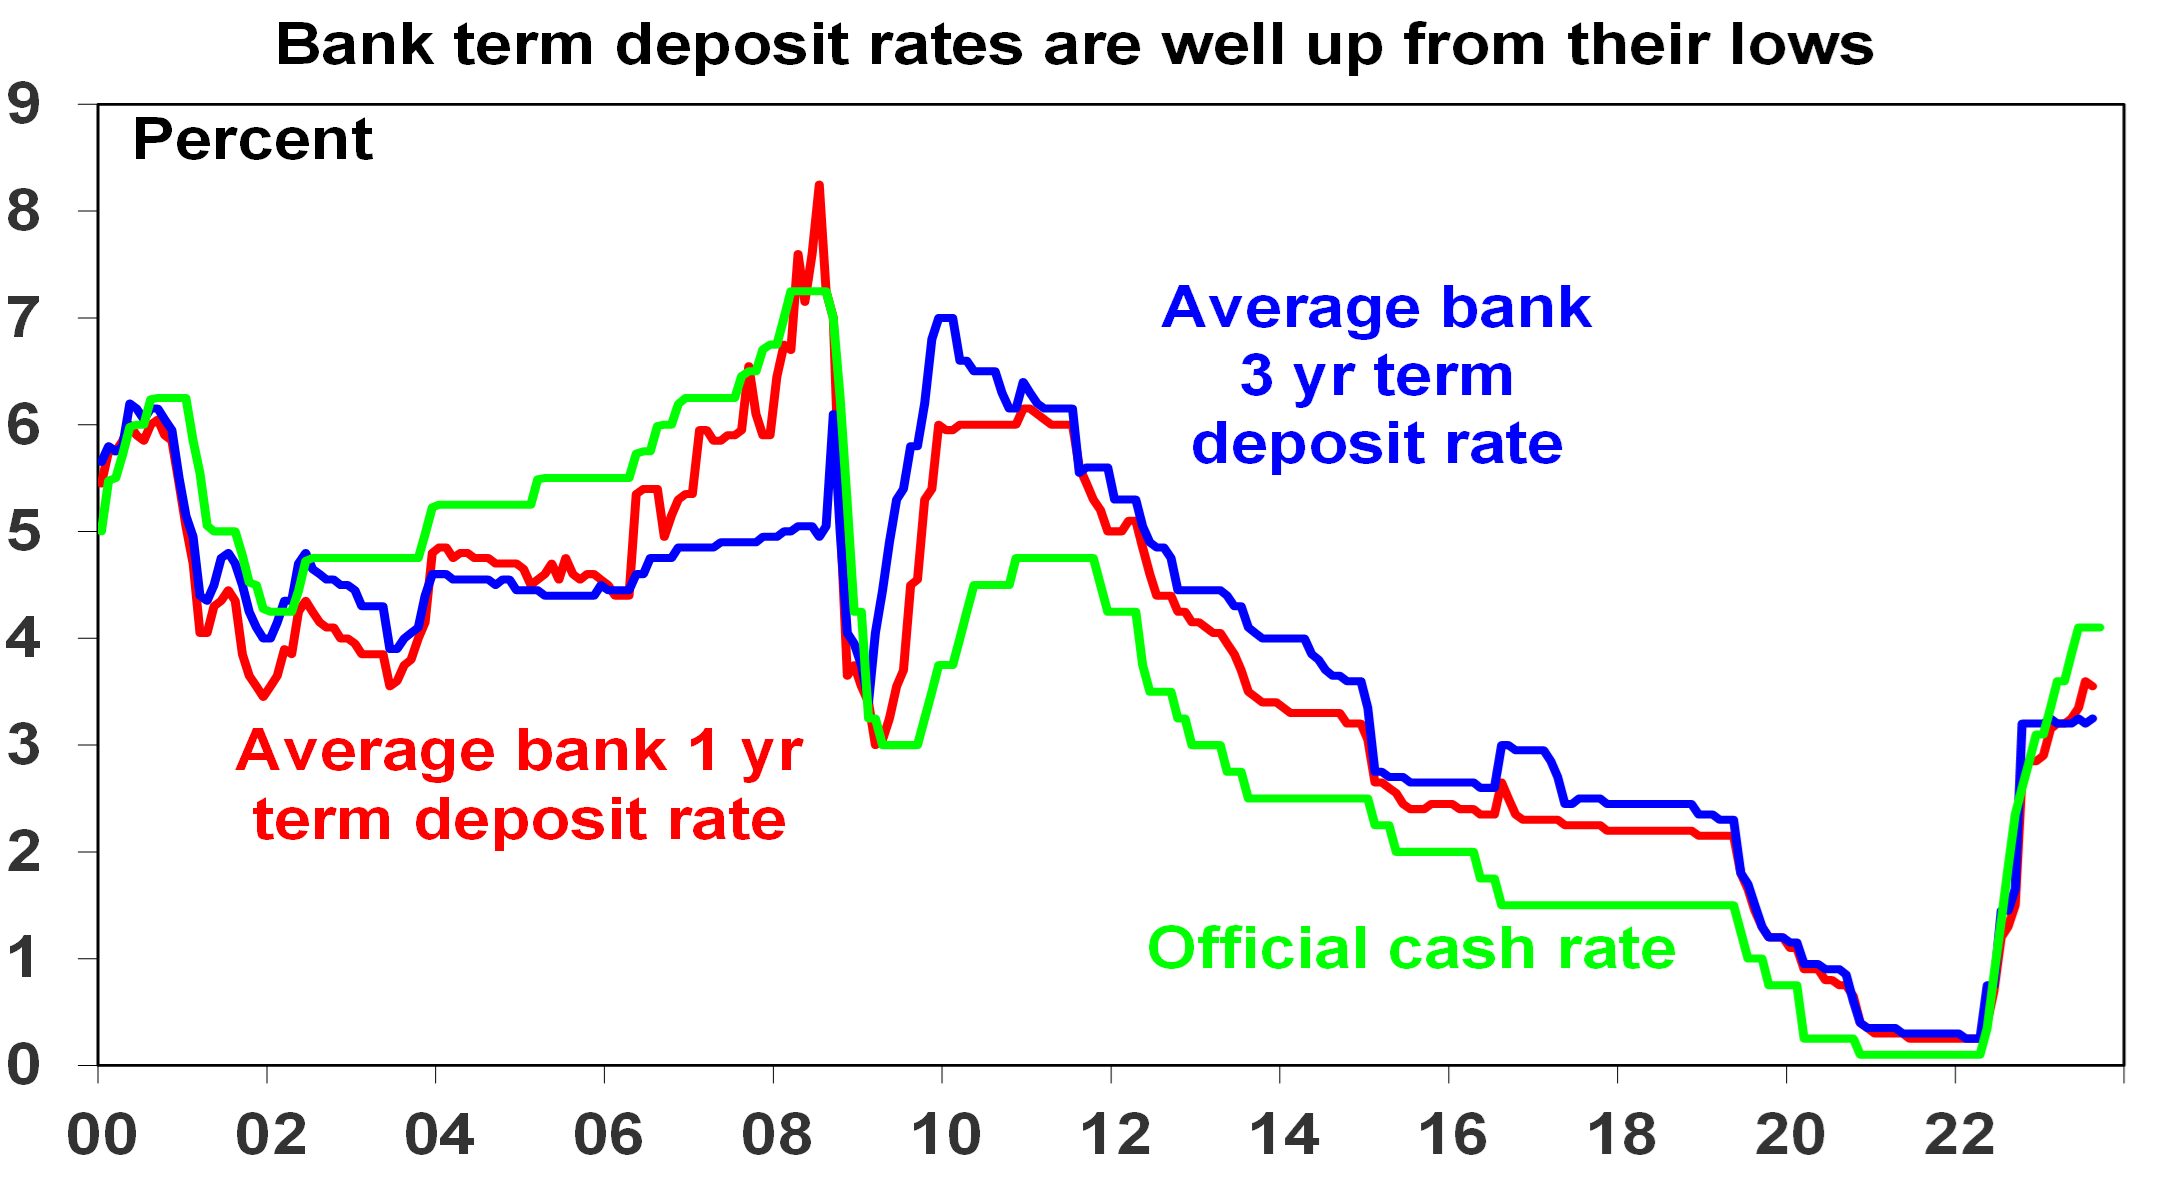 Bank term deposit rates are well up from their lows